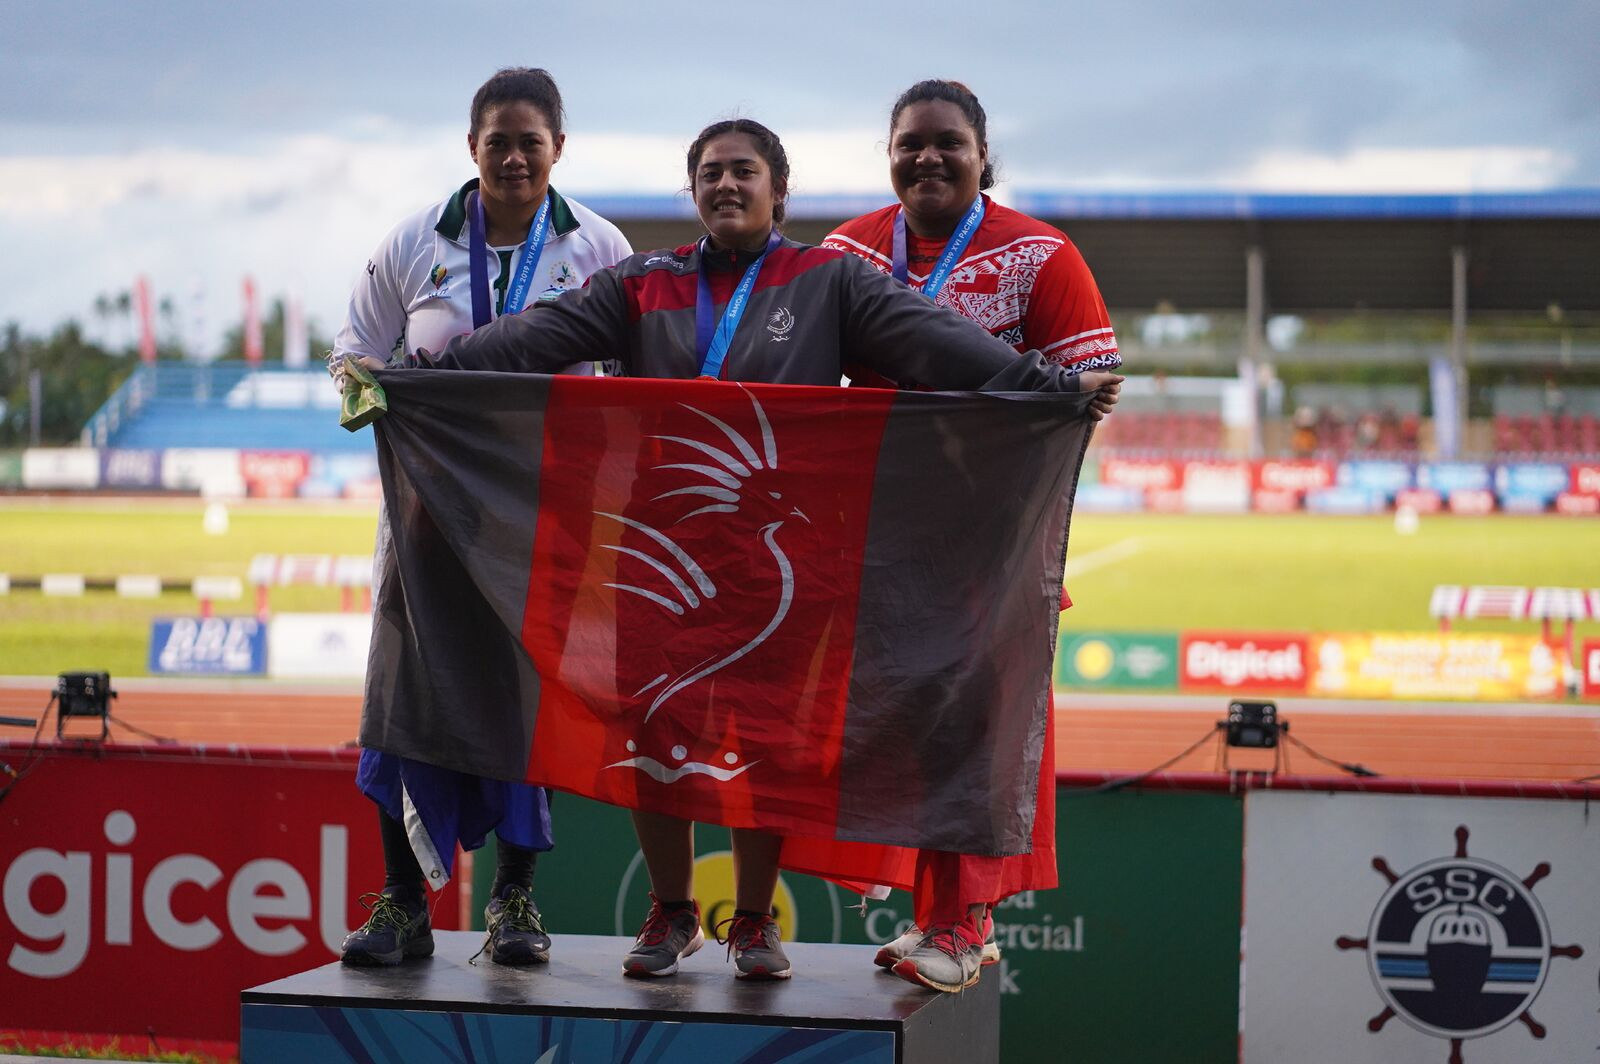 New Caledonia's Lesly Filituulaga celebrates winning the women's discus at the age of just 16 ©Games News Service